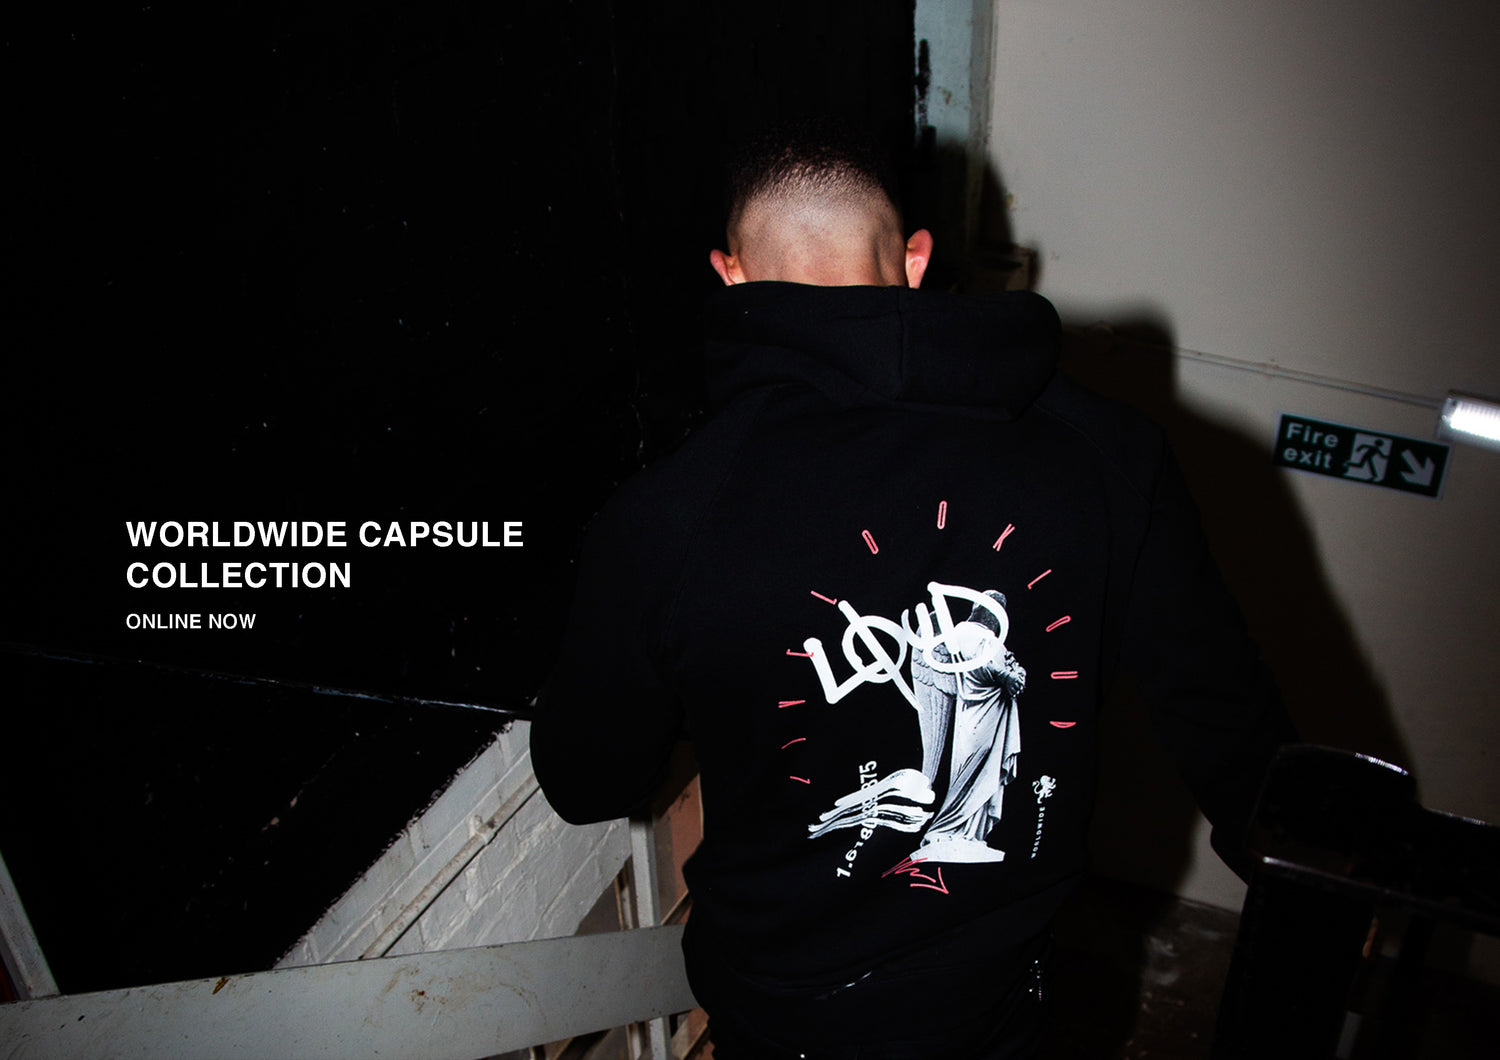 WORLDWIDE CAPSULE COLLECTION - ONLINE NOW.